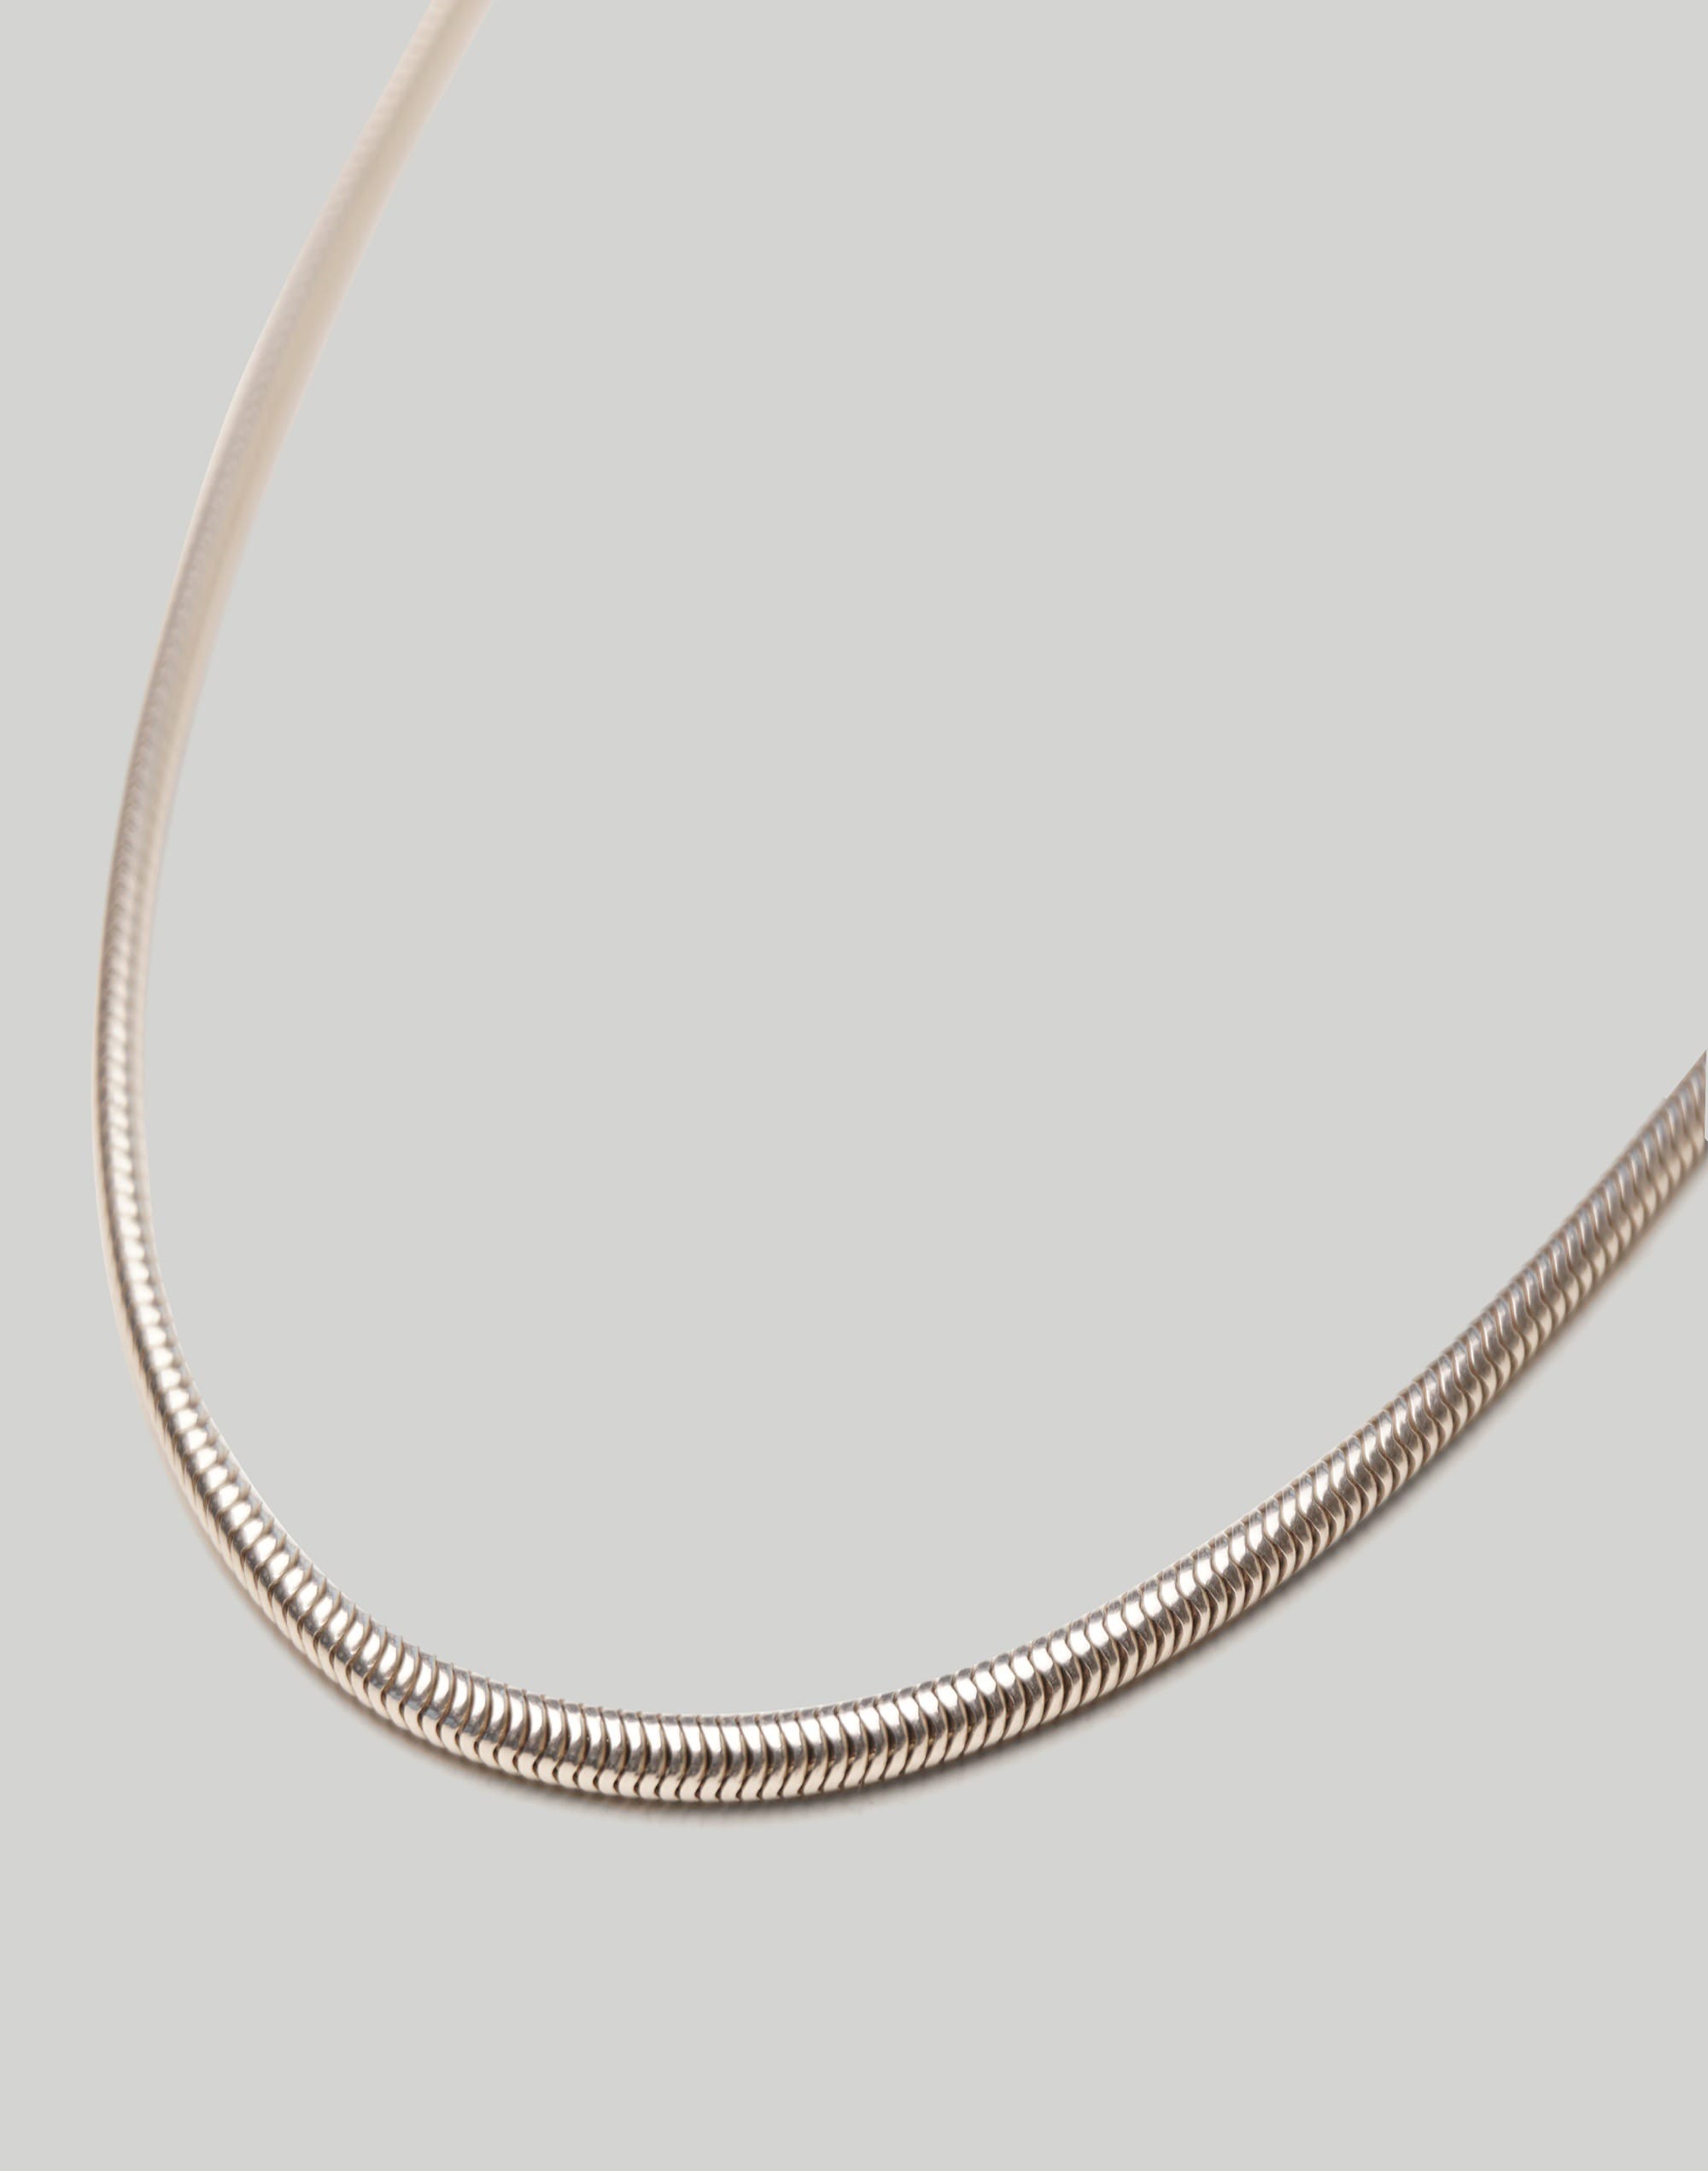 CHARLOTTE CAUWE STUDIO SNAKE CHAIN NECKLACE IN STERLING SILVER